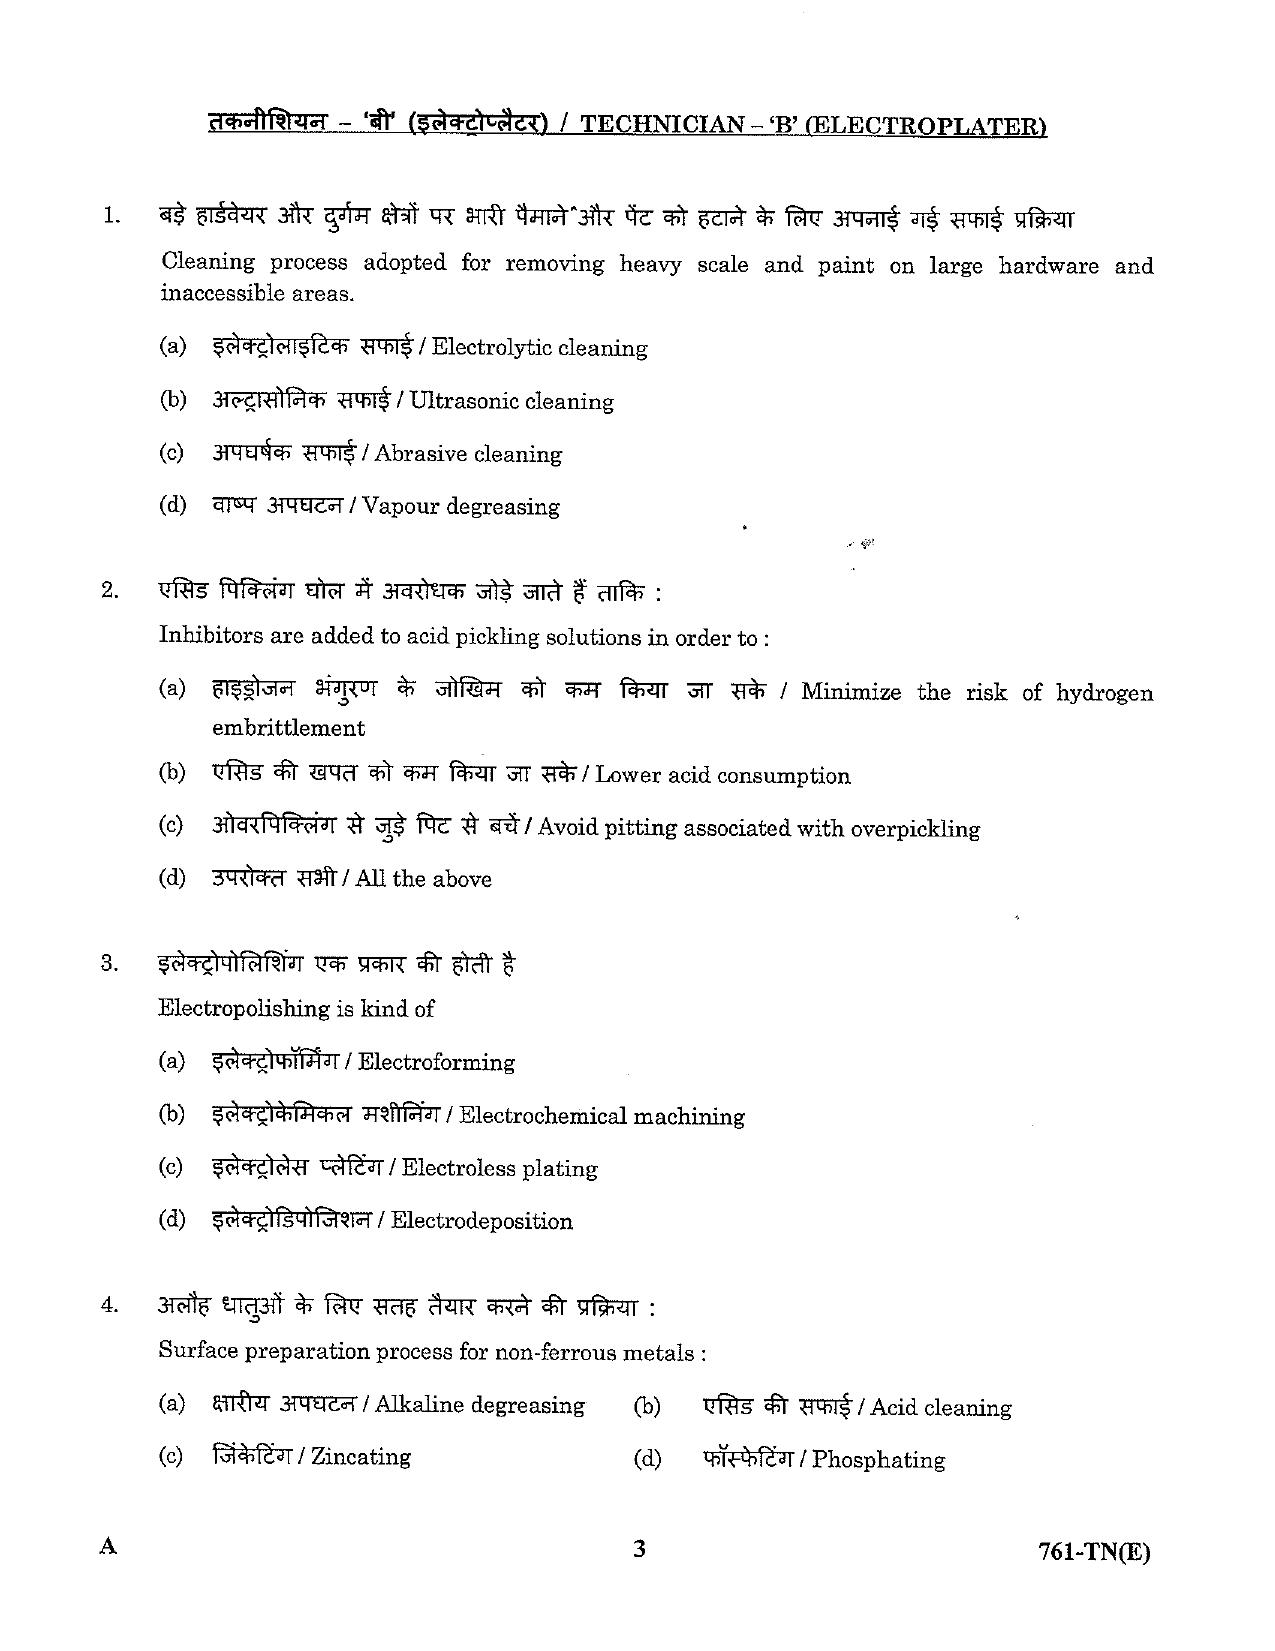 LPSC Technician ‘B’ (Electroplater) 2023 Question Paper - Page 3